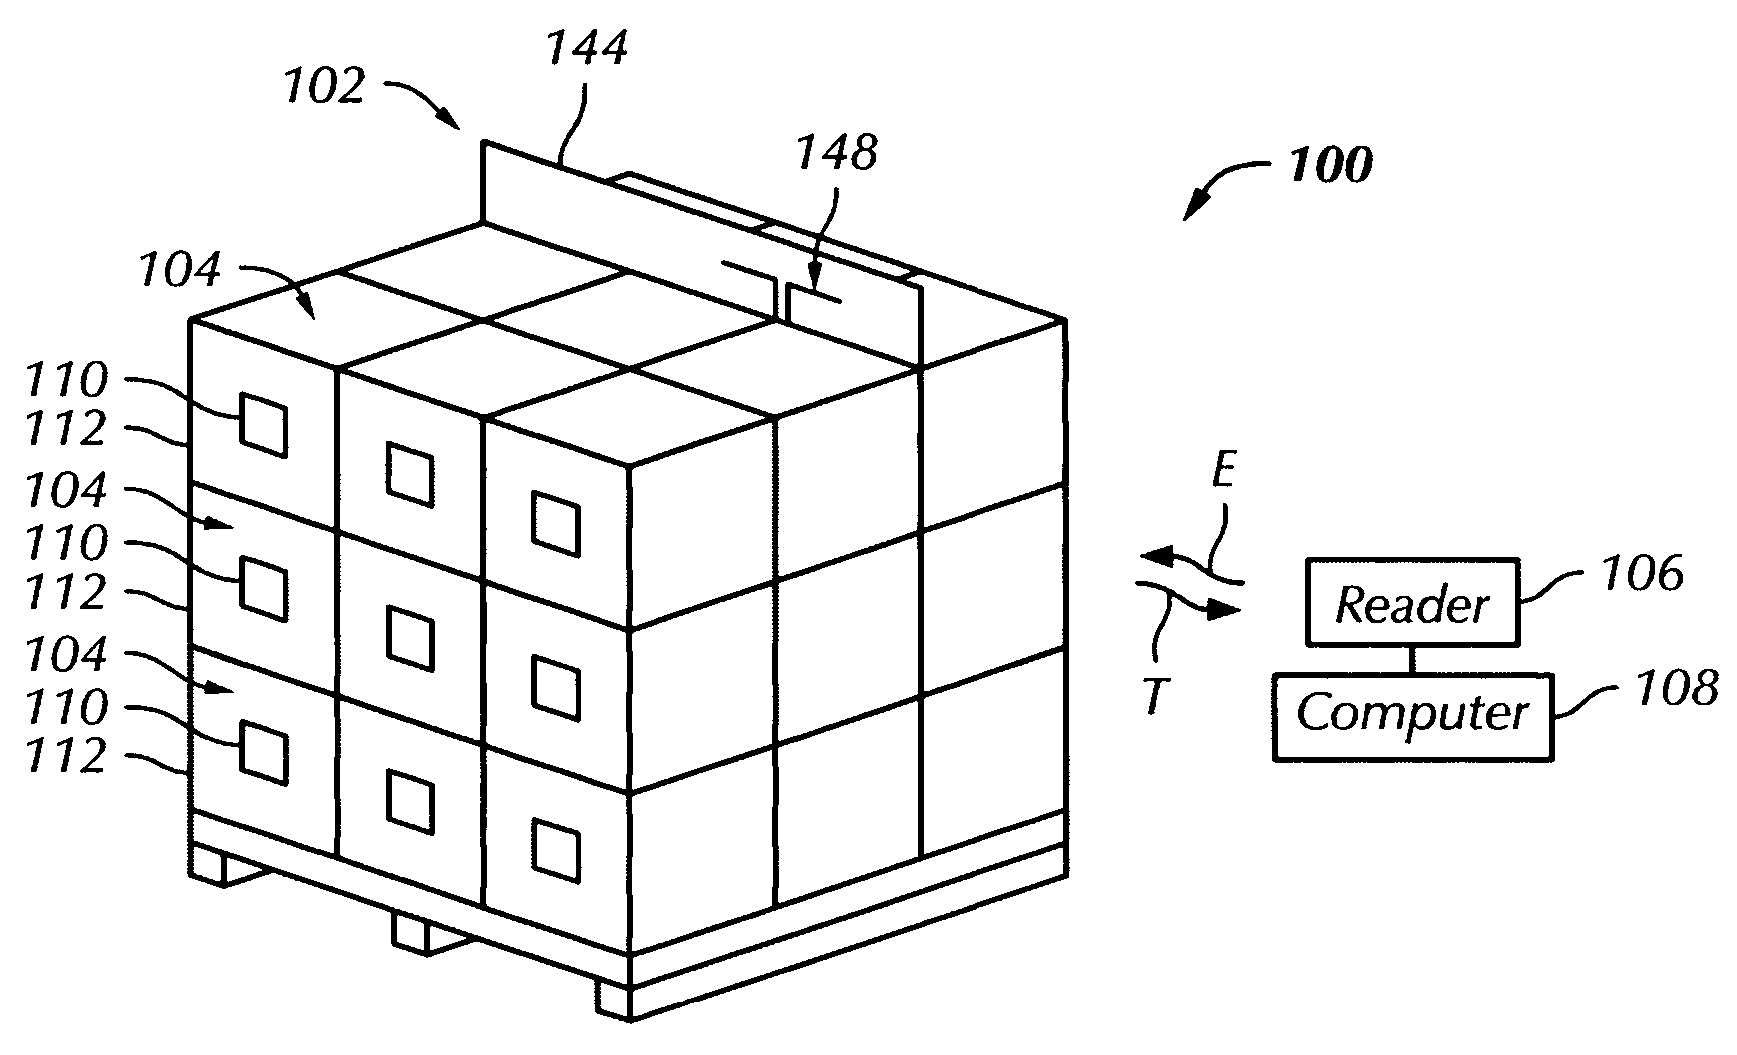 RFID devices for enabling reading of non-line-of-sight items